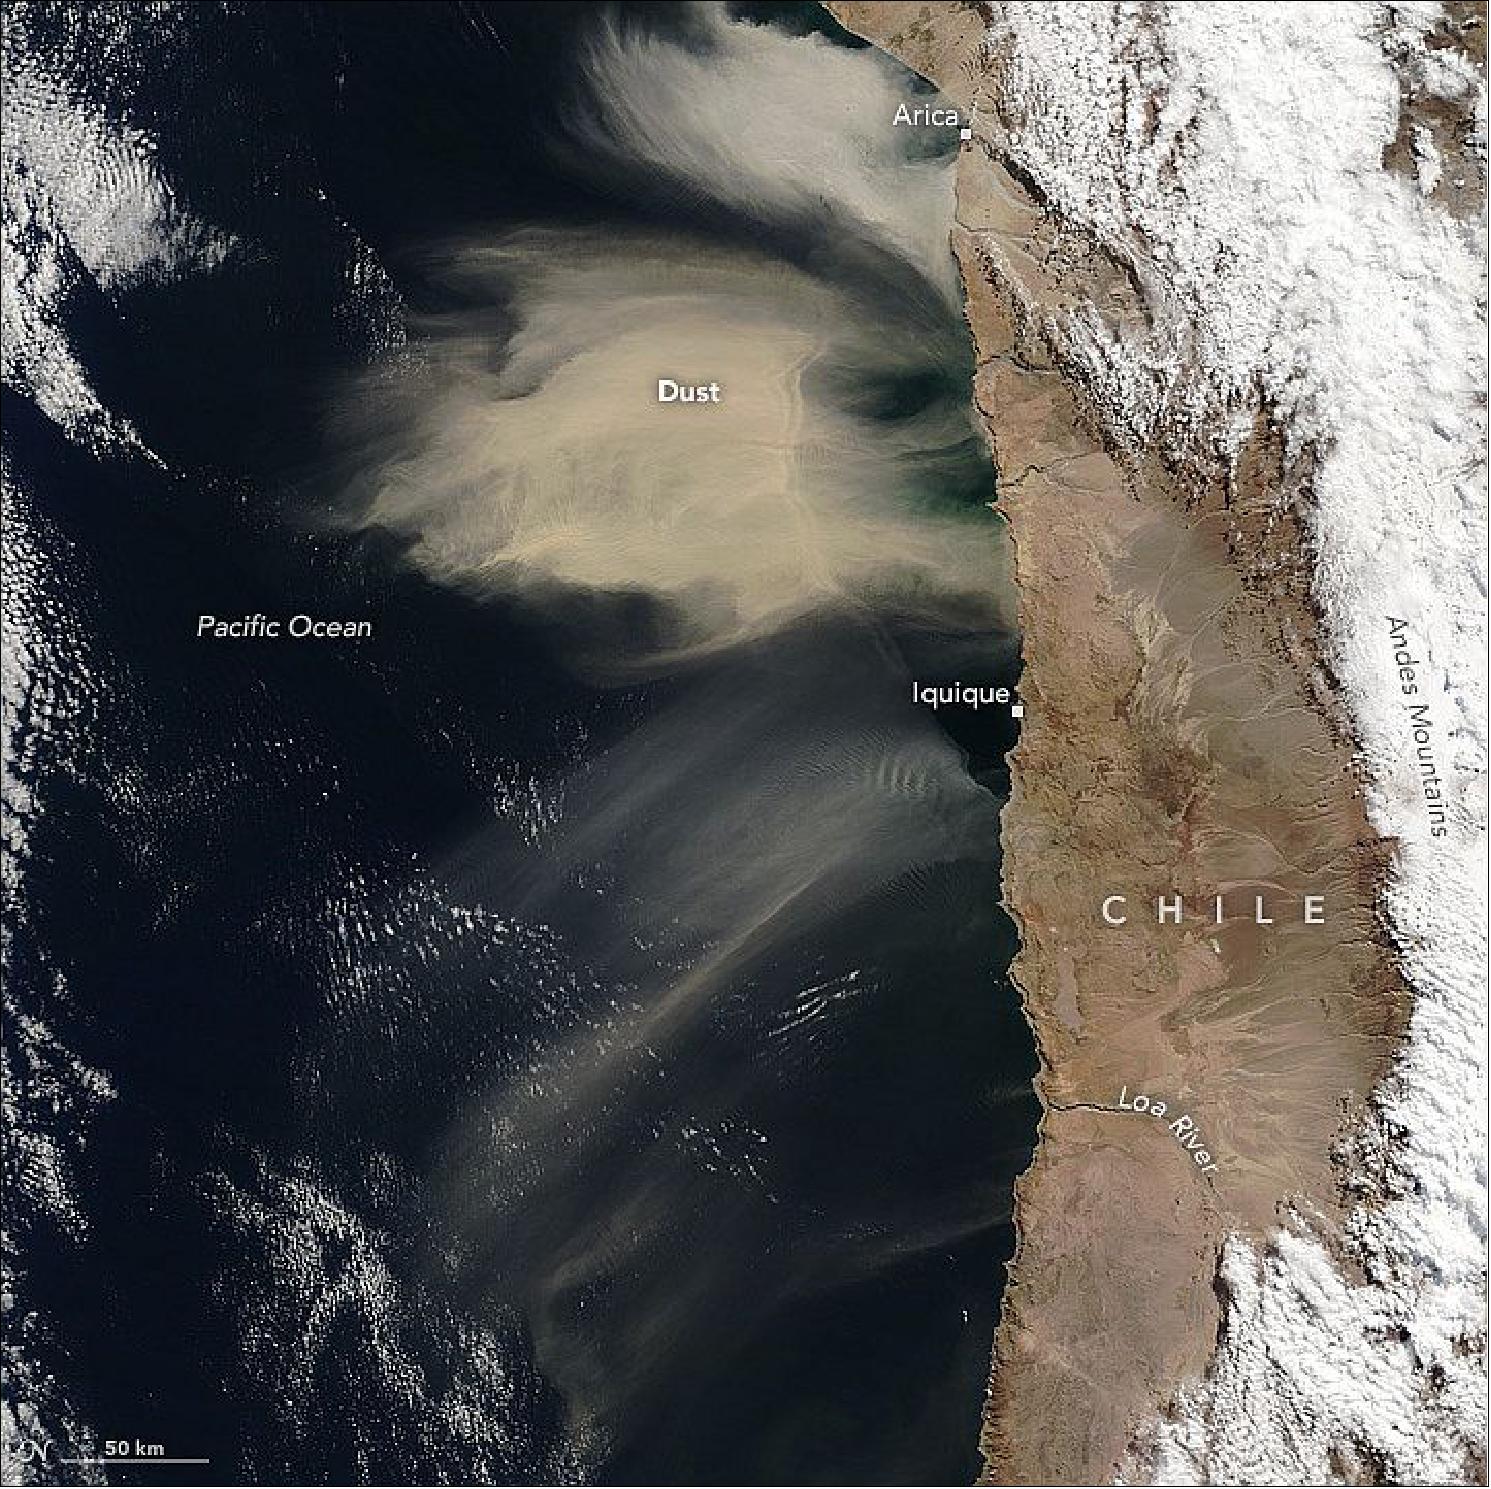 Figure 81: On July 8, 2016, the MODIS instrument on Terra acquired this natural-color image of an airborne dust cloud off the coast of Chile (image credit: NASA Earth Observatory, Jeff Schmalz)